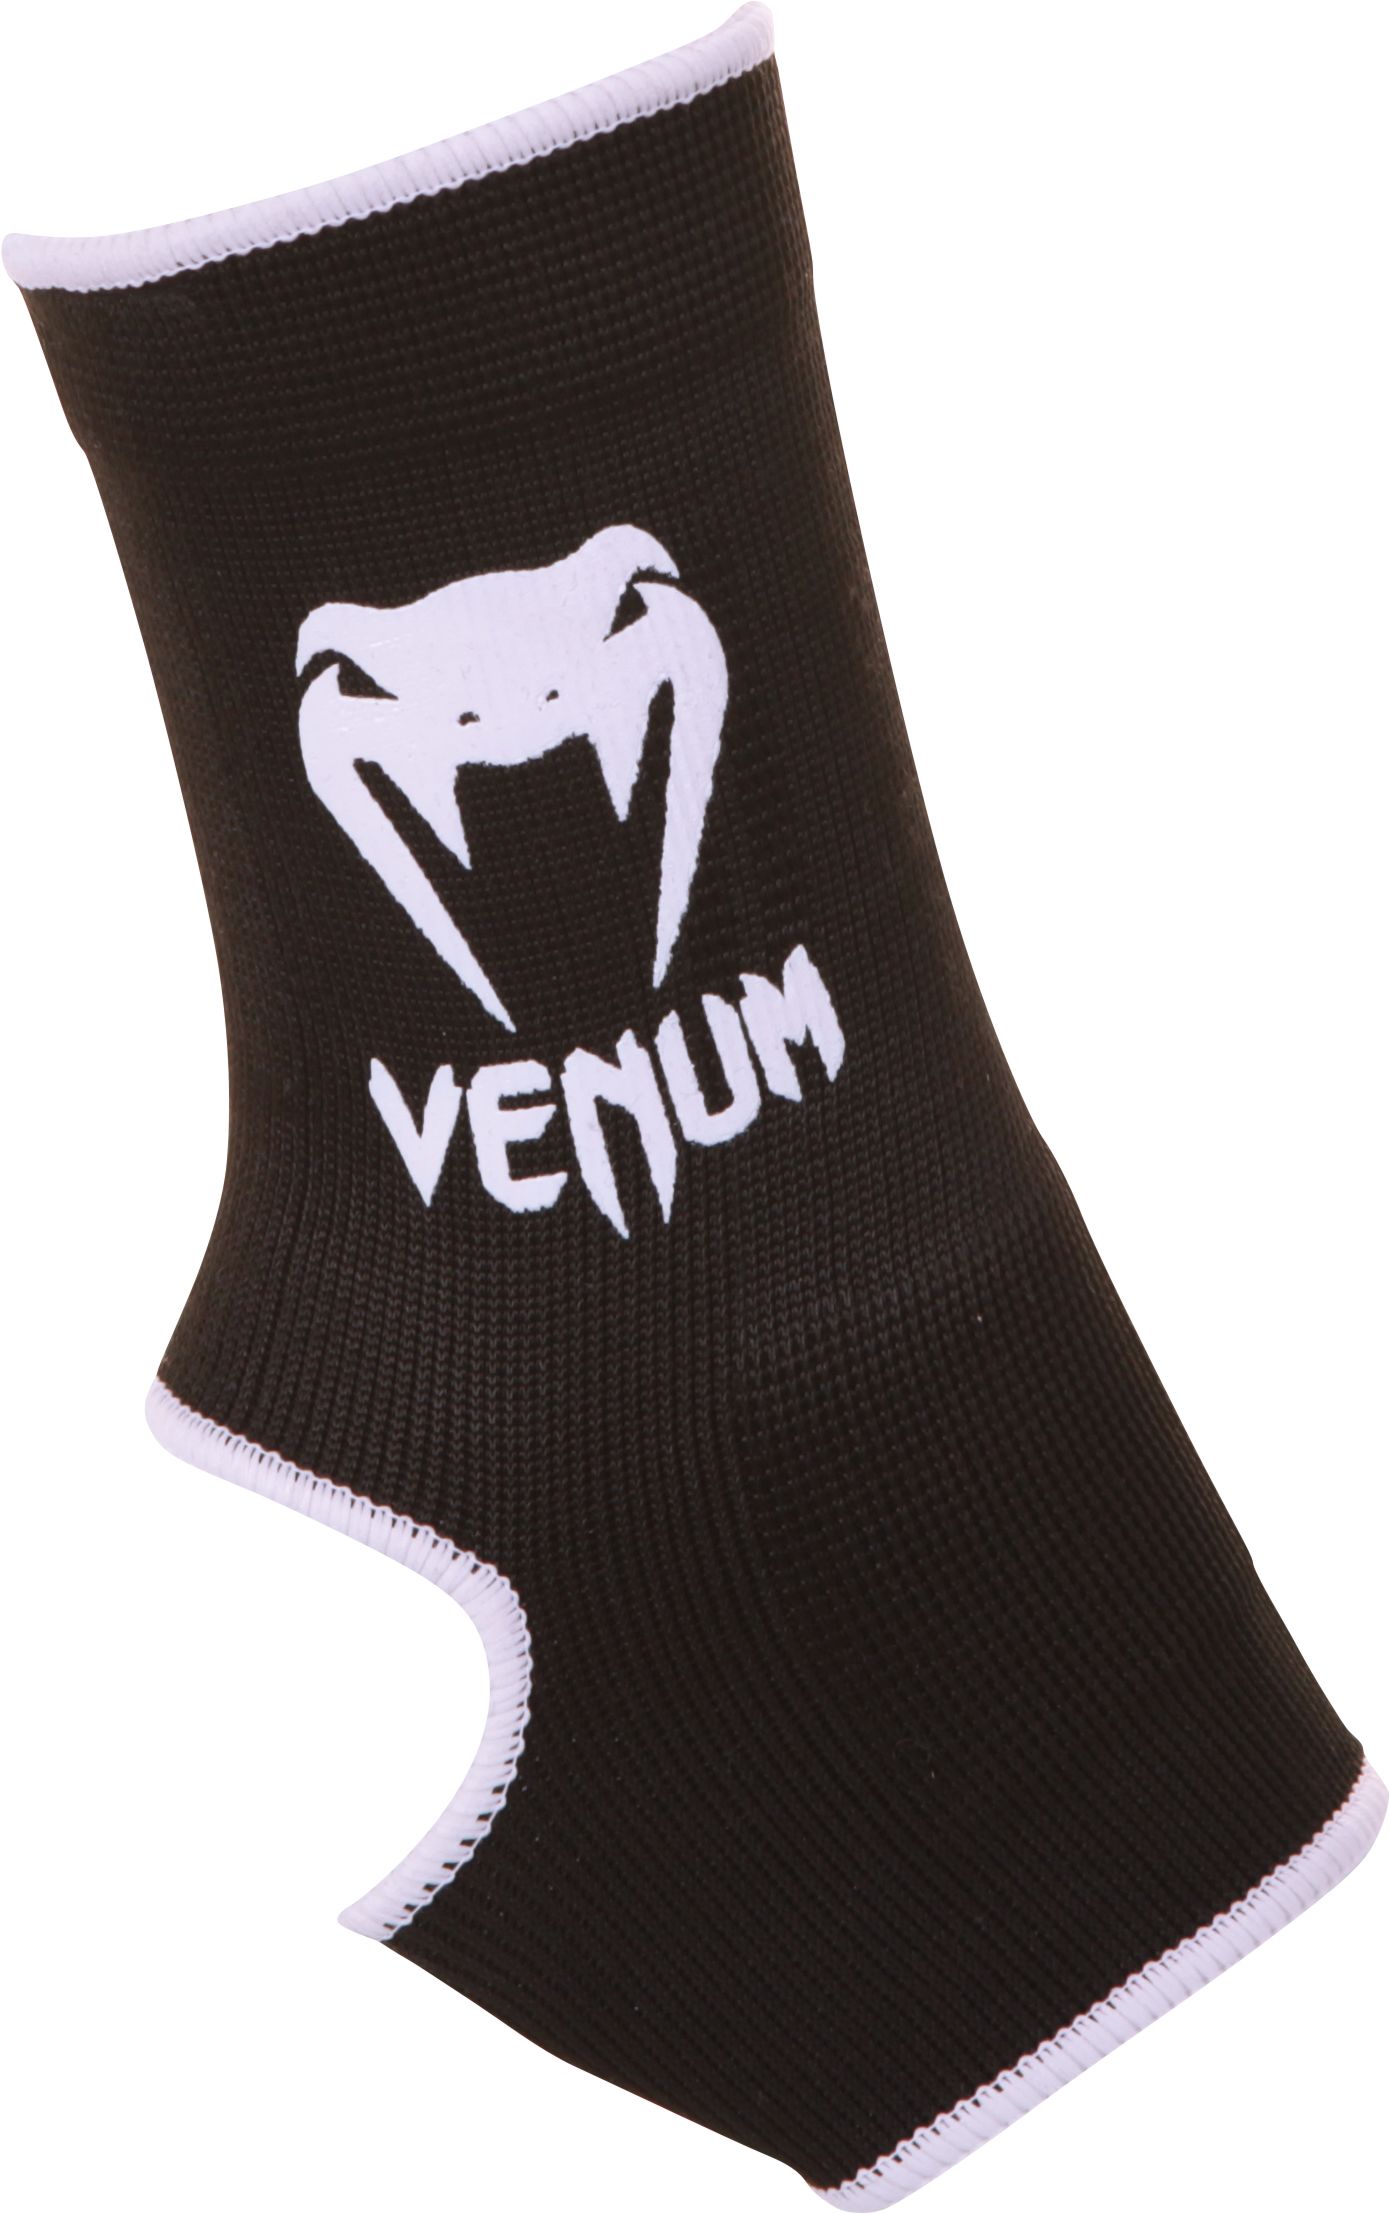 VENUM, KONTACT ANKLE SUPPORT GUARD